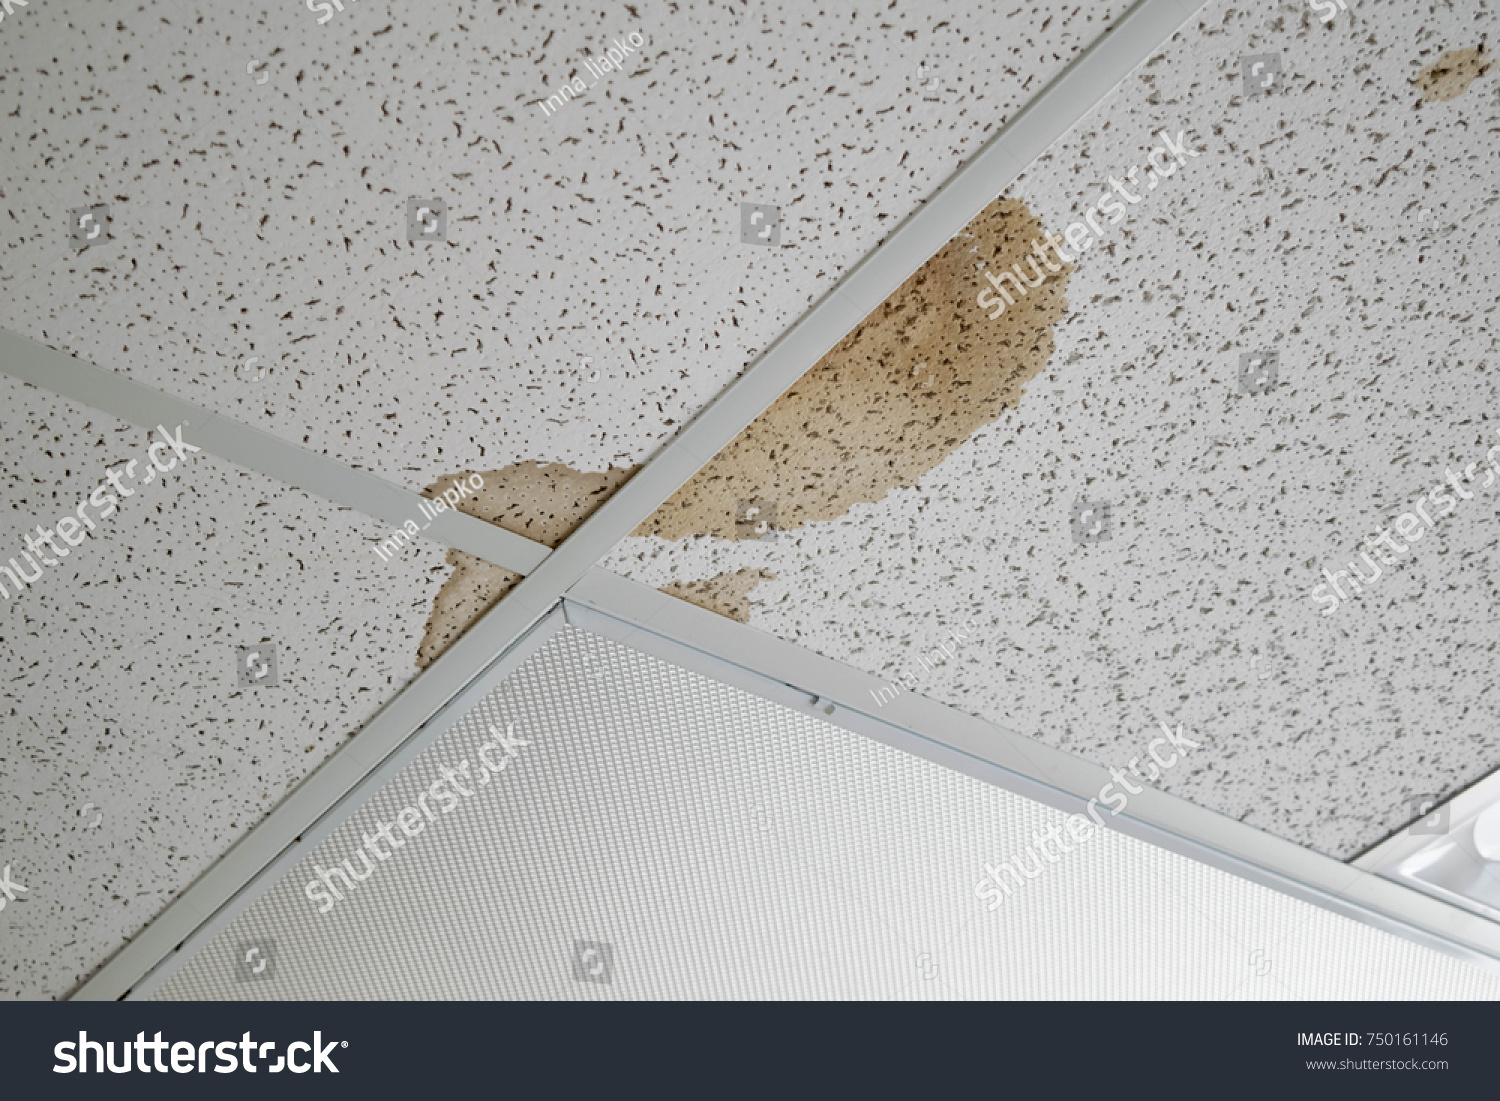 Water Leak On Ceiling Tiles Damaged Stock Image Download Now